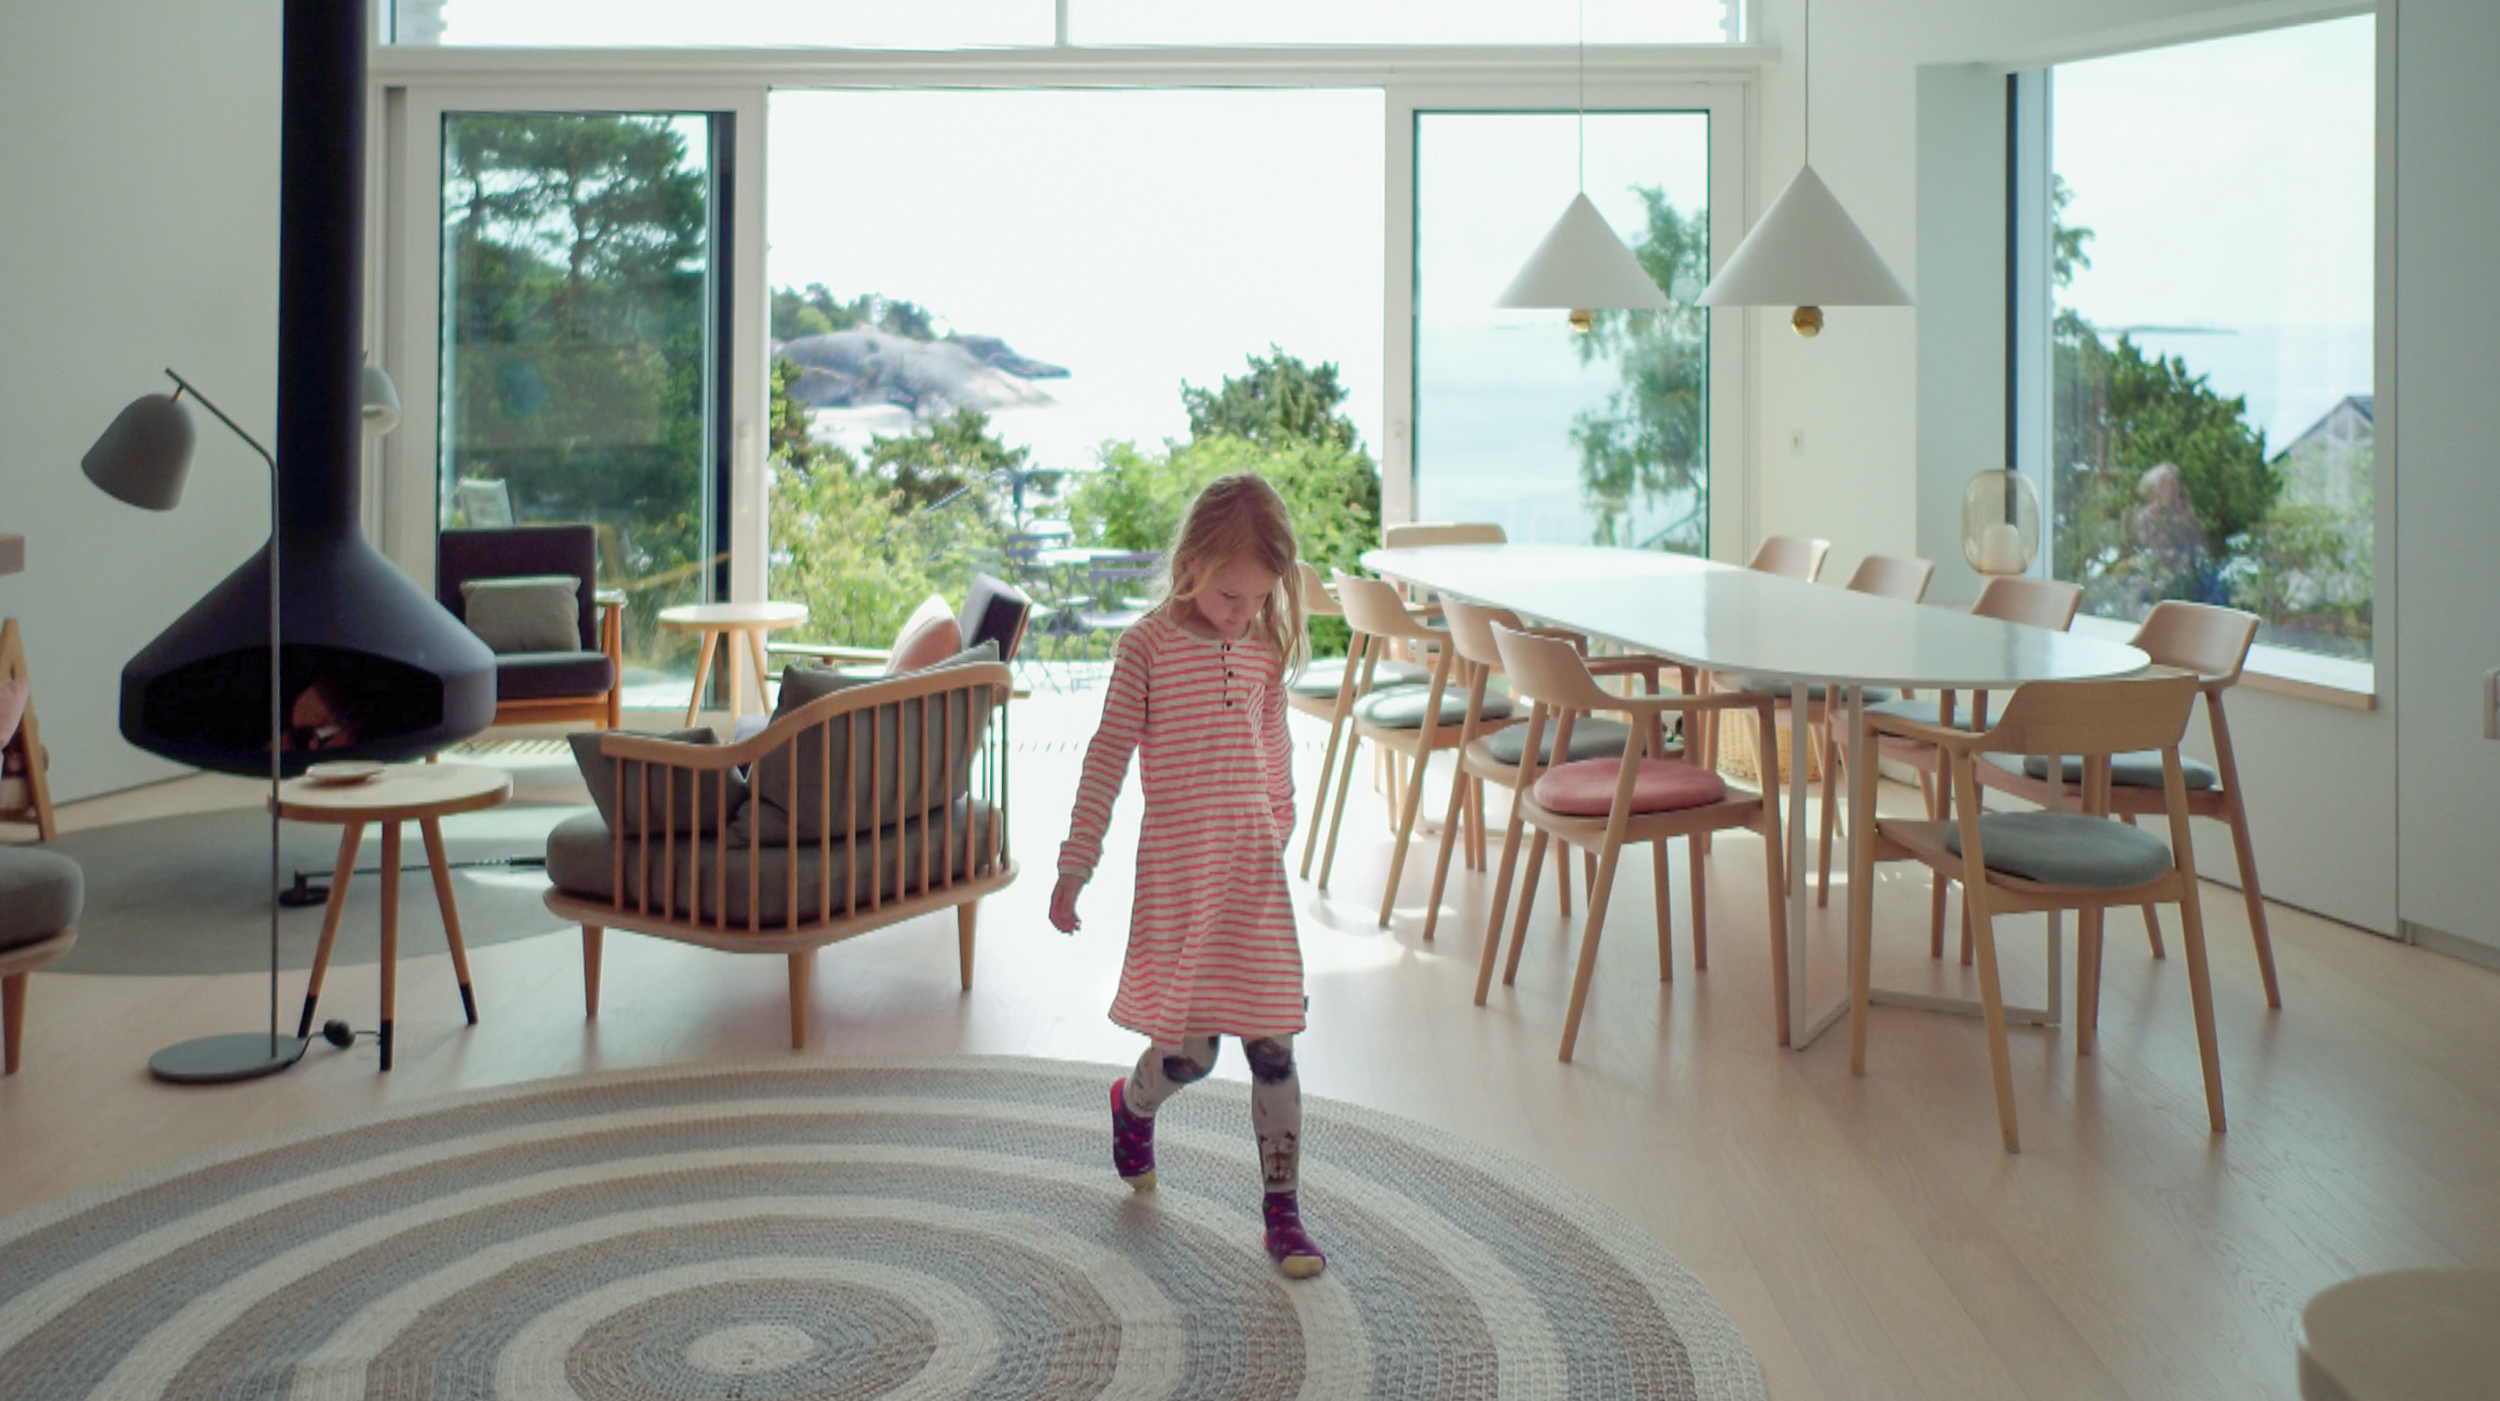 Small girls walking along an pattern of a rug in a room with large windows and sea behind her